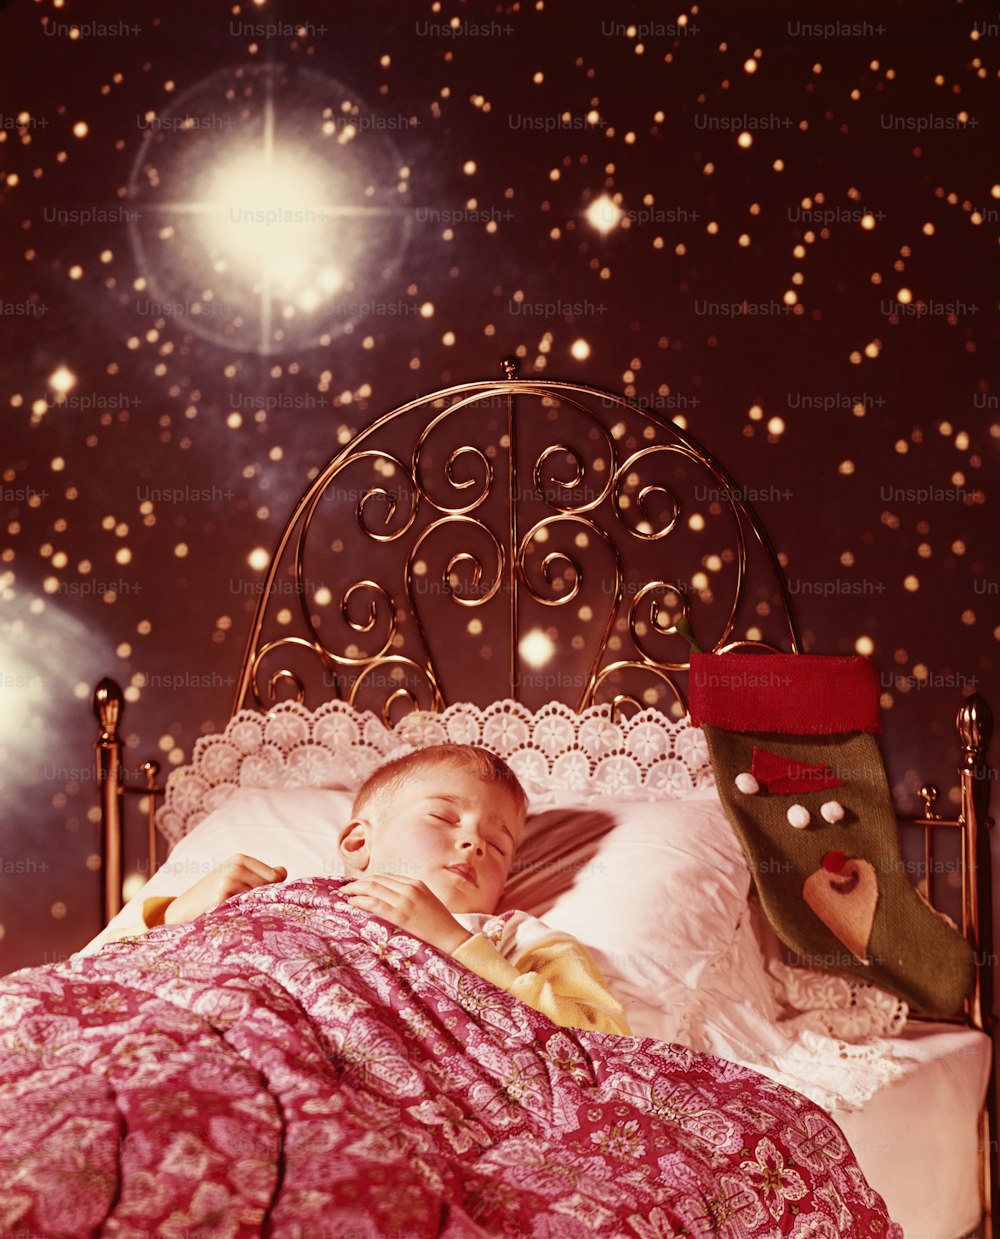 UNITED STATES - CIRCA 1960s:  Little boy sleeping in brass bed with Christmas stocking and starry dream images.